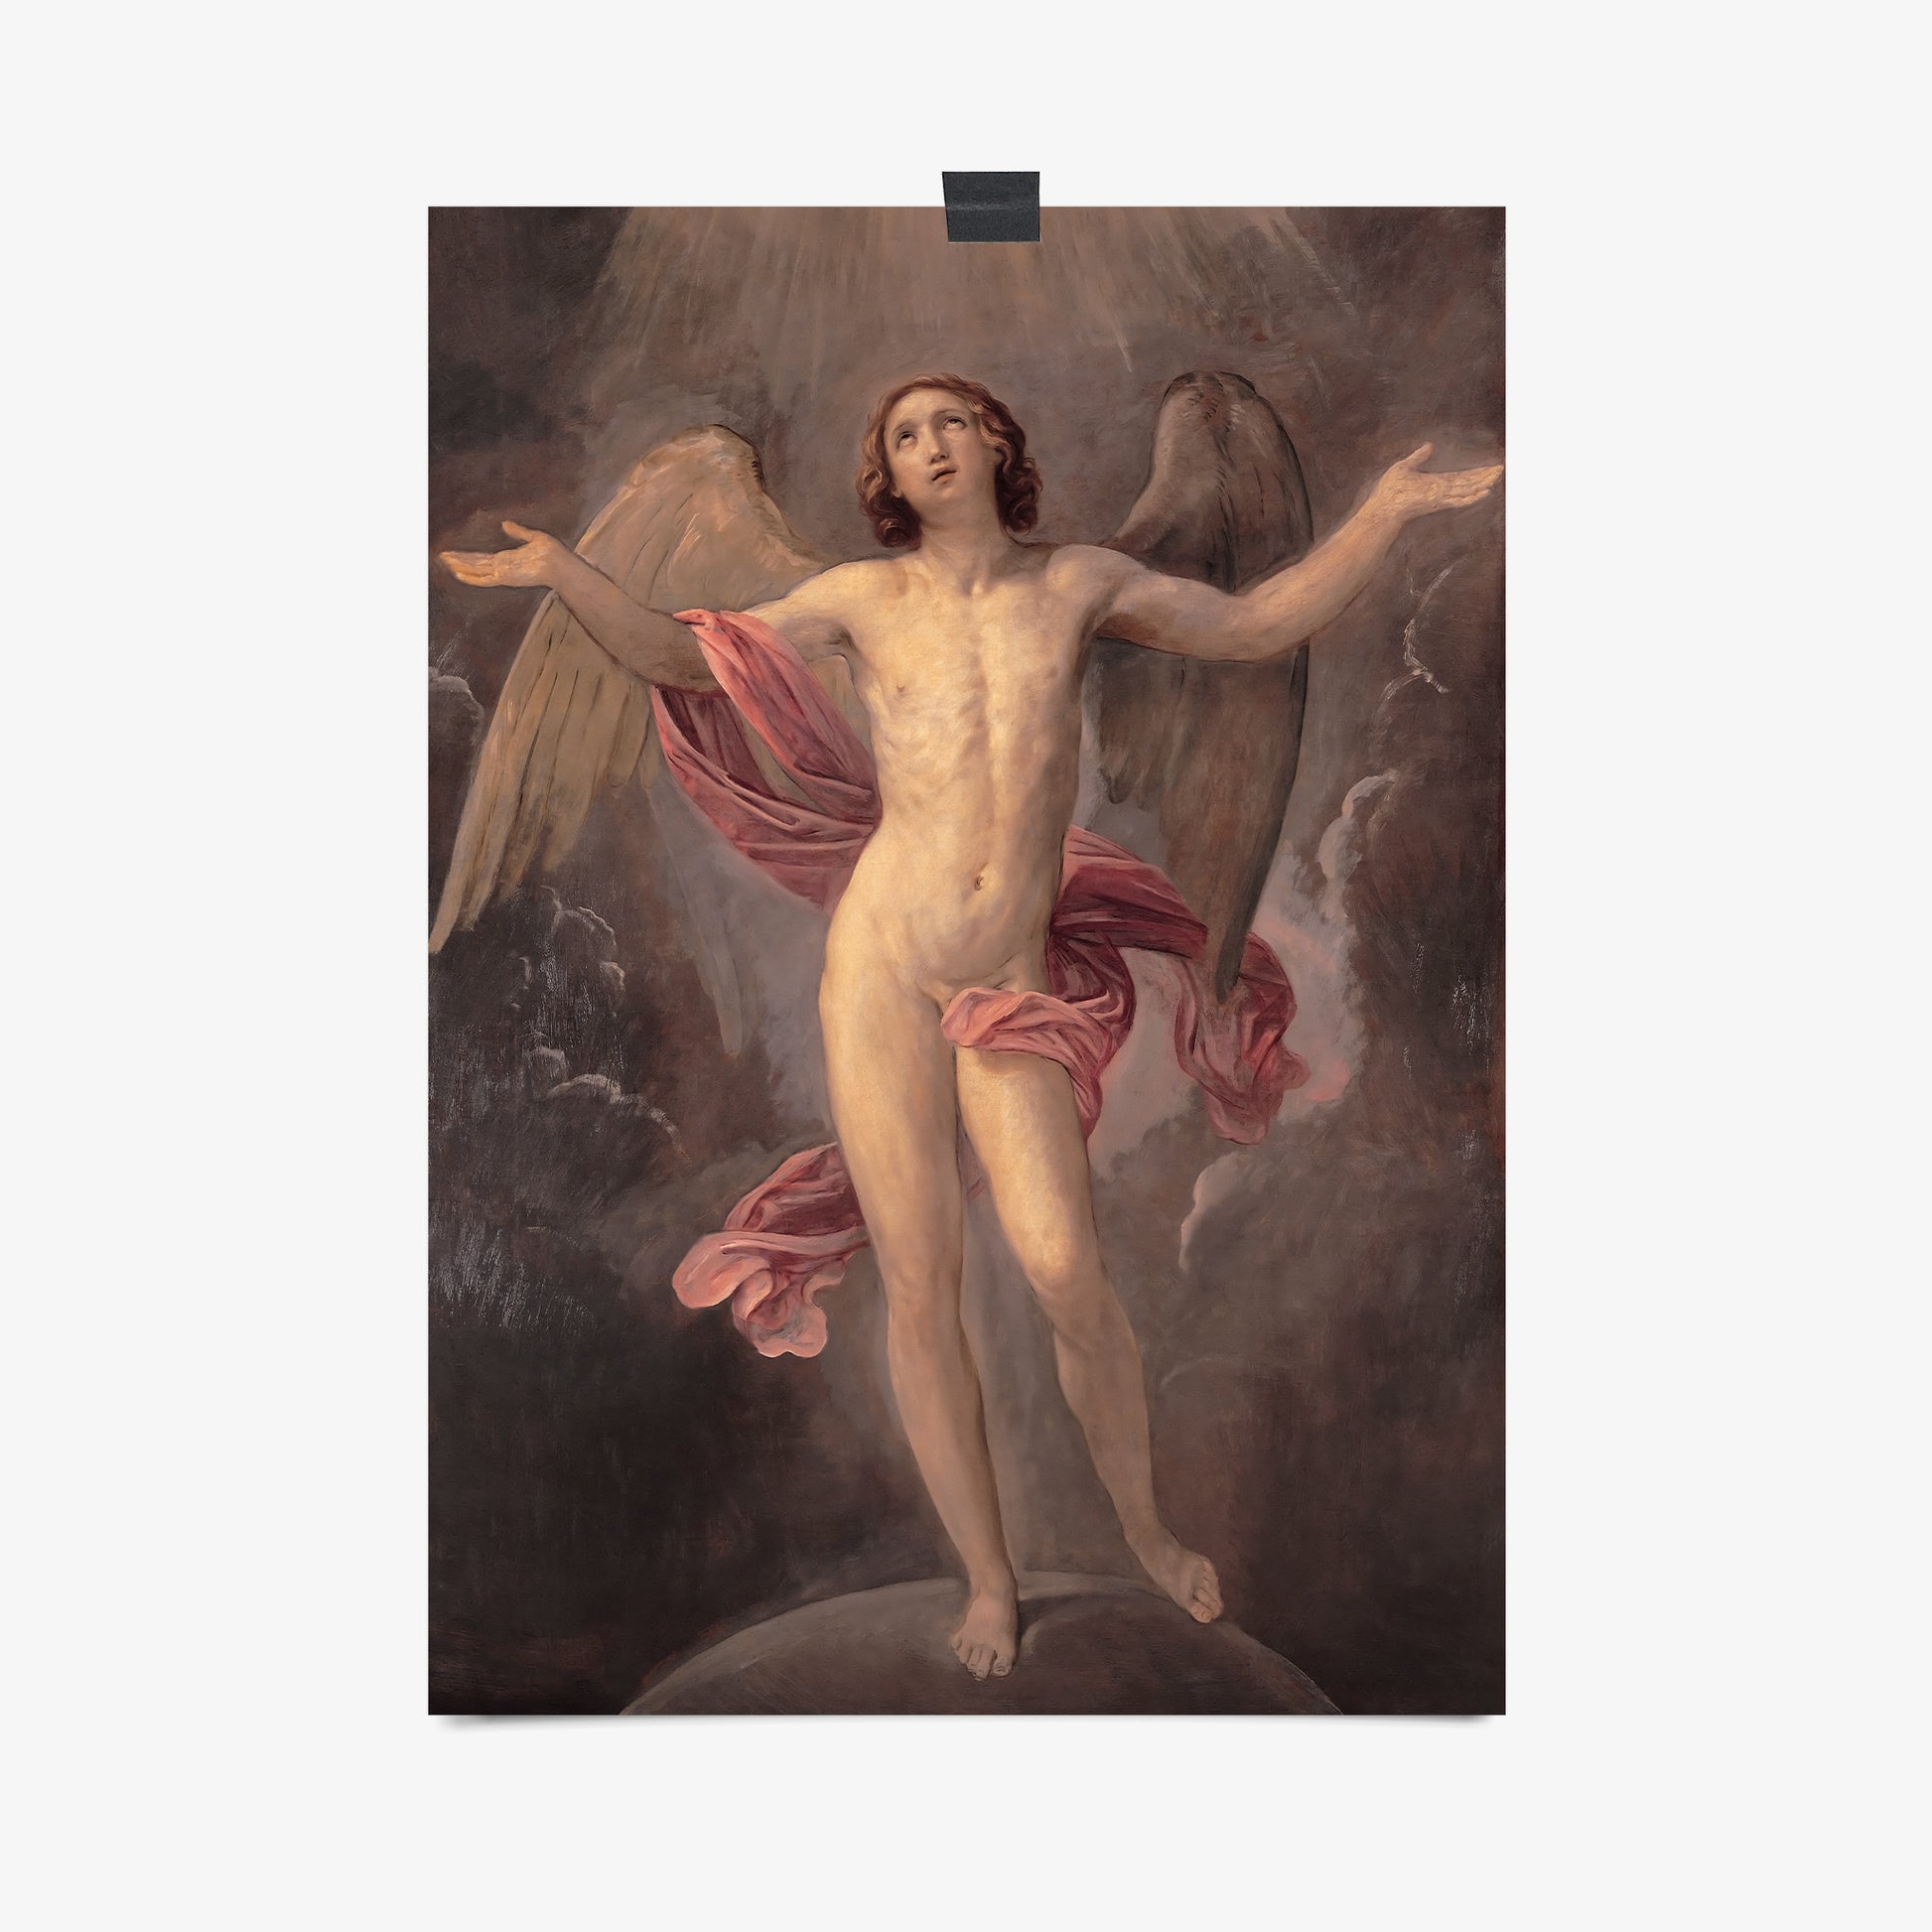 Be inspired by our classic art print Blessed Soul by Guido Reni. This artwork was printed using the giclée process on archival acid-free paper that captures its timeless beauty in every detail.